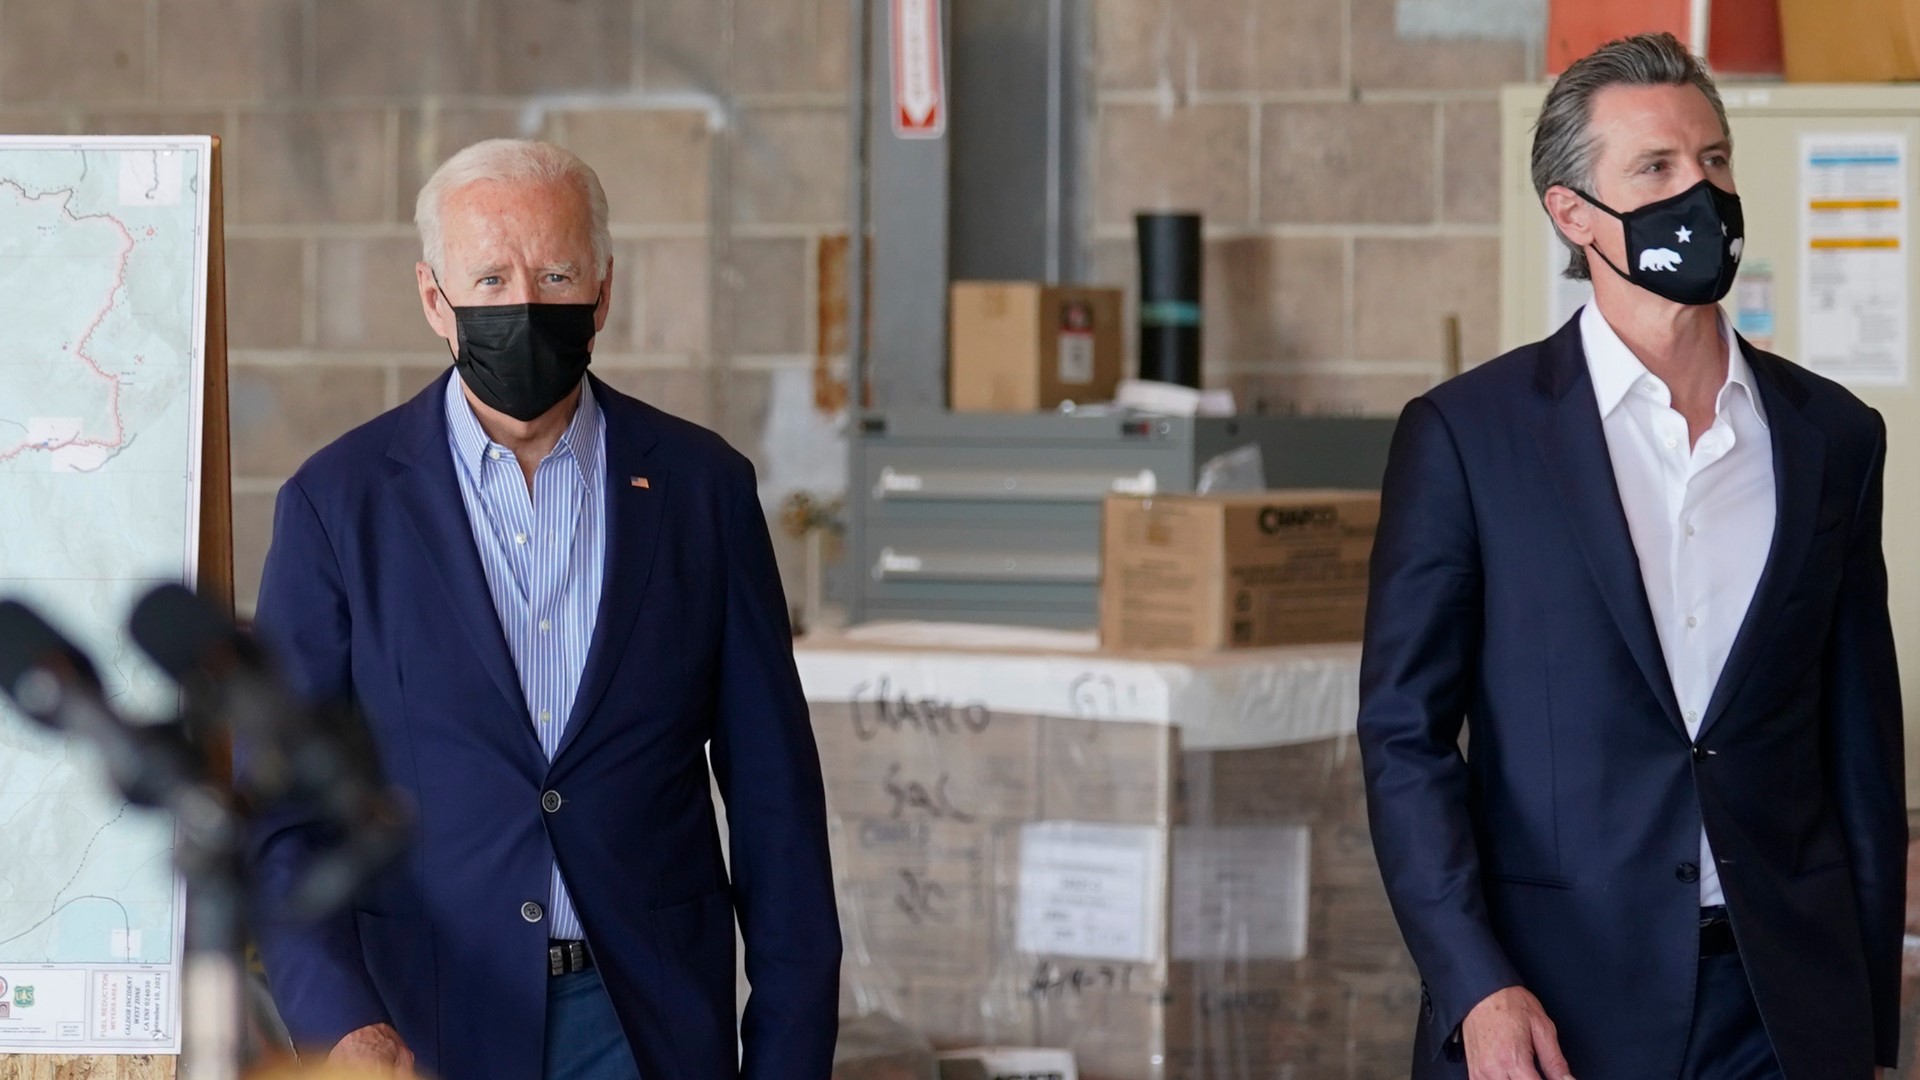 President Joe Biden speaks about his Build Back Better plan and infrastructure deal after touring the devastation left behind by the Caldor Fire.